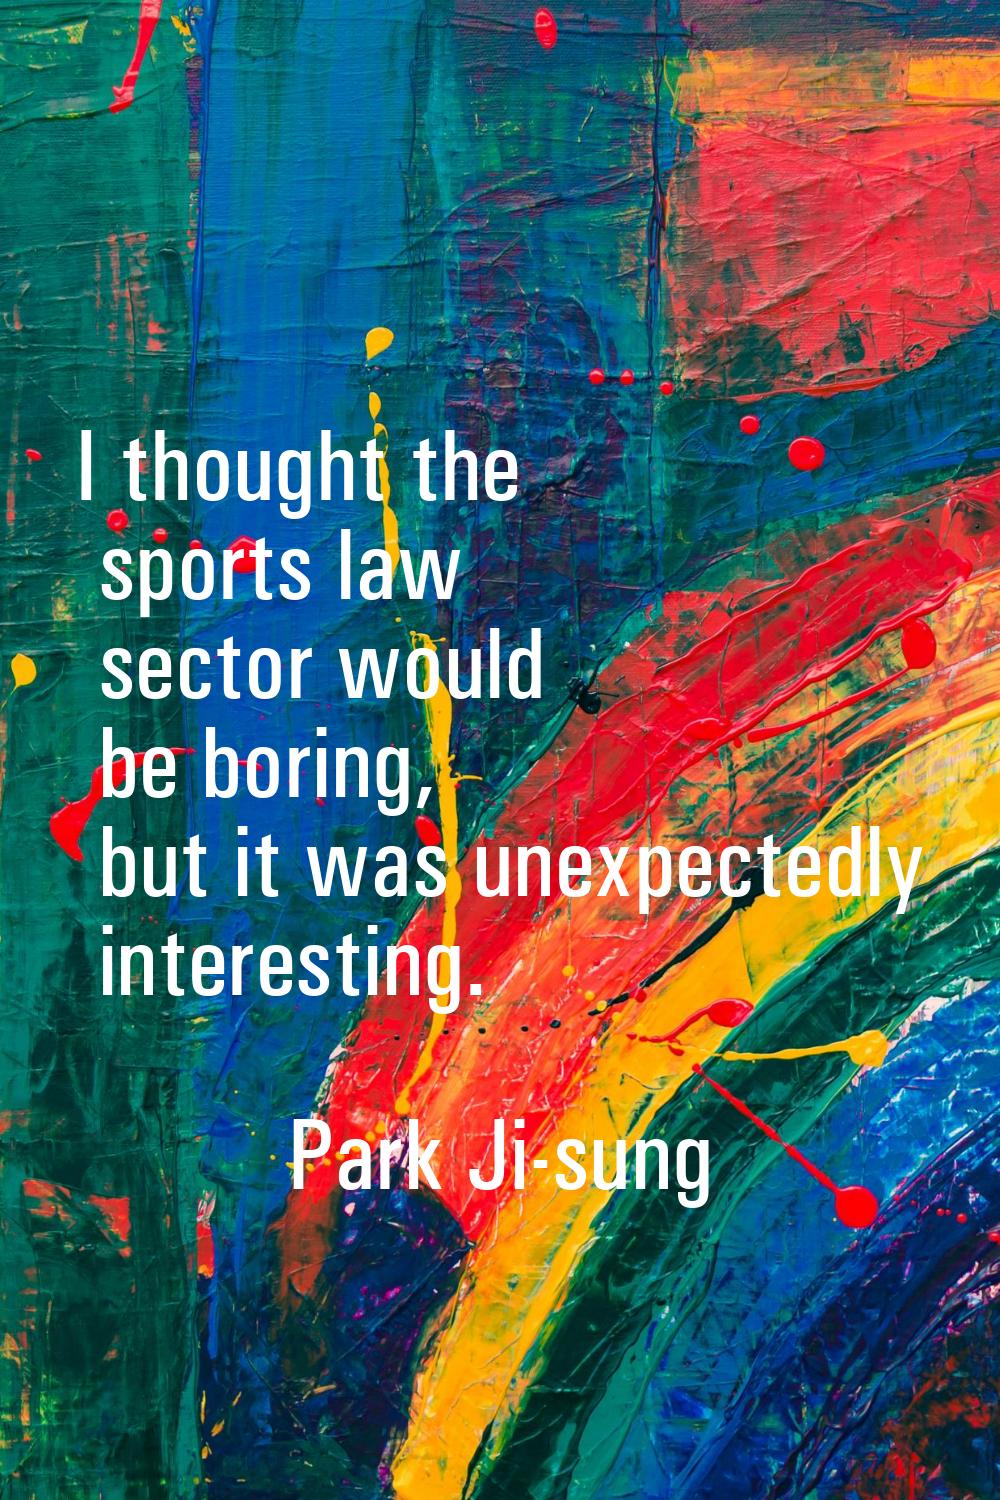 I thought the sports law sector would be boring, but it was unexpectedly interesting.